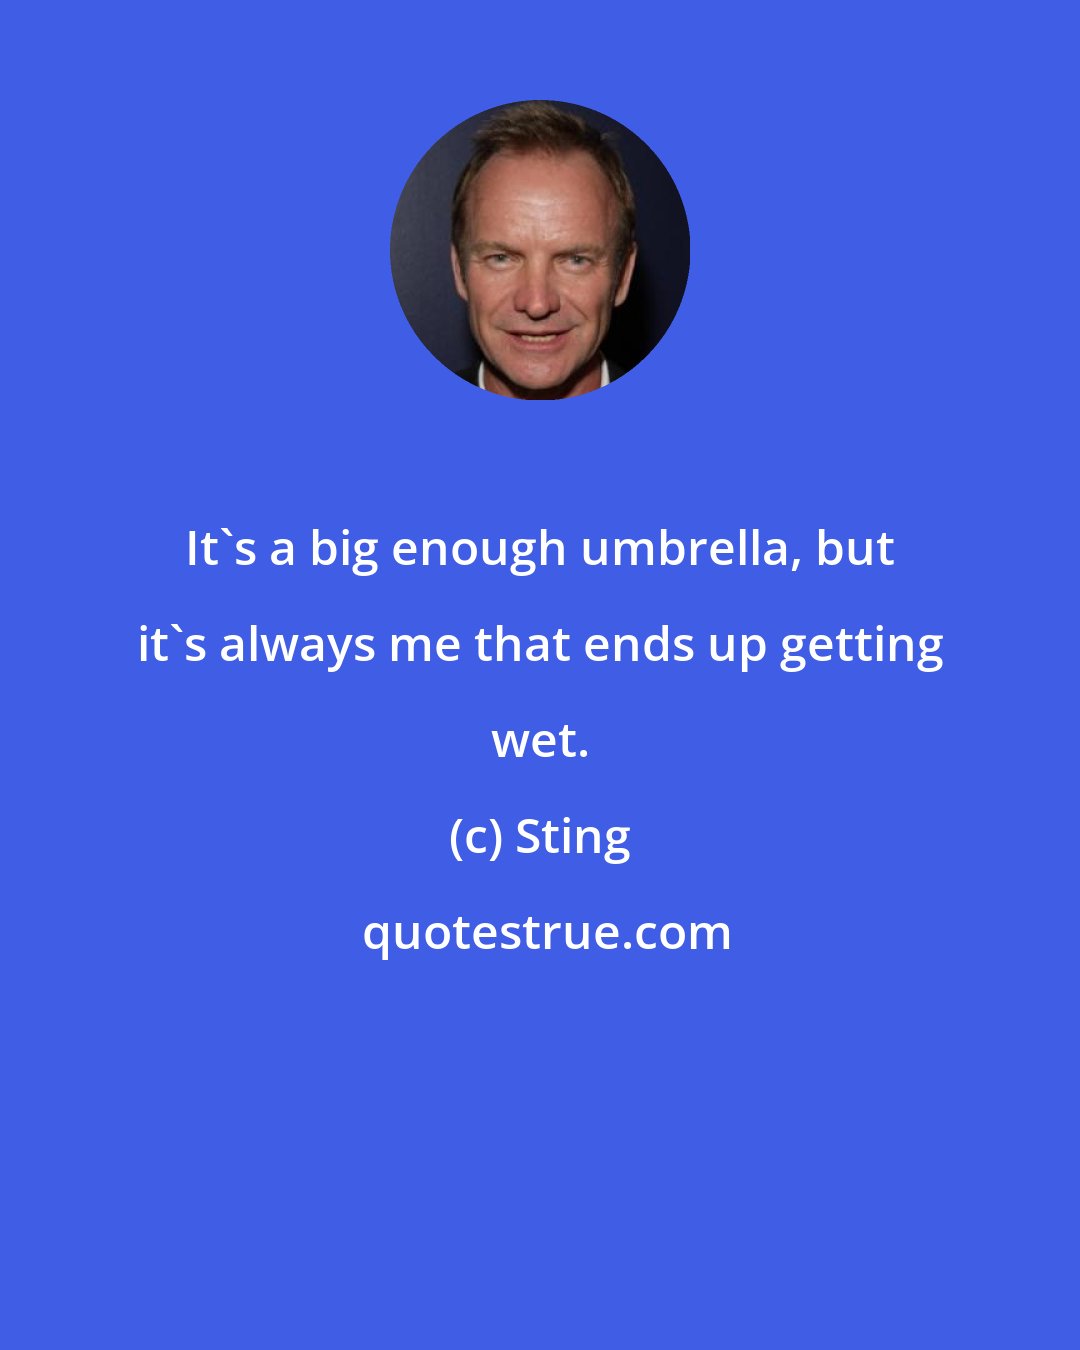 Sting: It's a big enough umbrella, but it's always me that ends up getting wet.